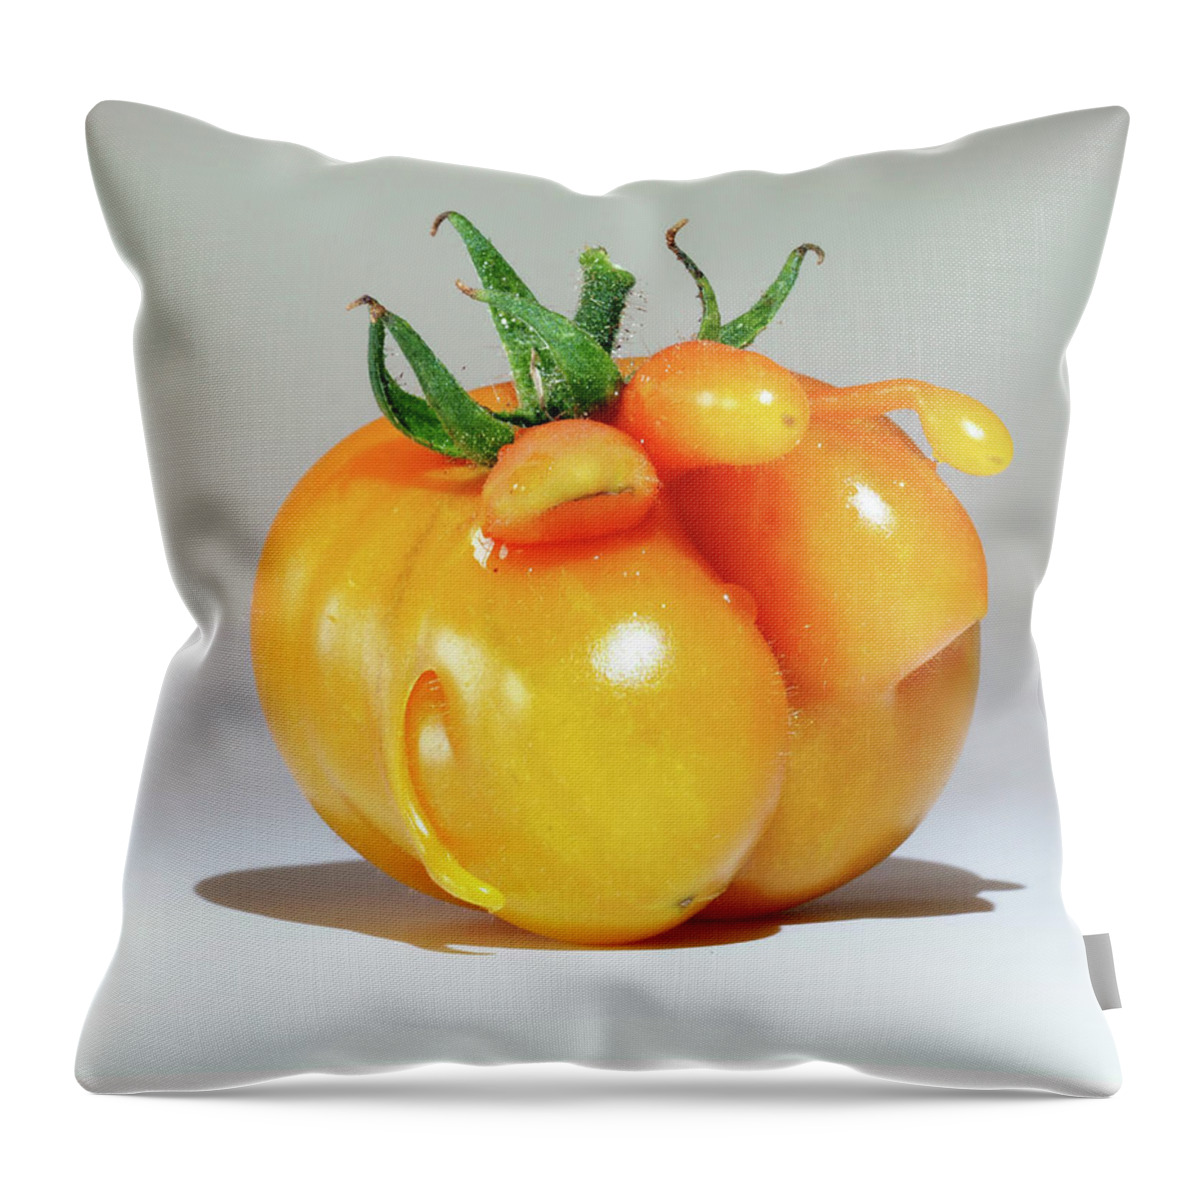 Heirlooms Throw Pillow featuring the photograph When Mr. Stripey's Genes Go Awry by Joe Schofield